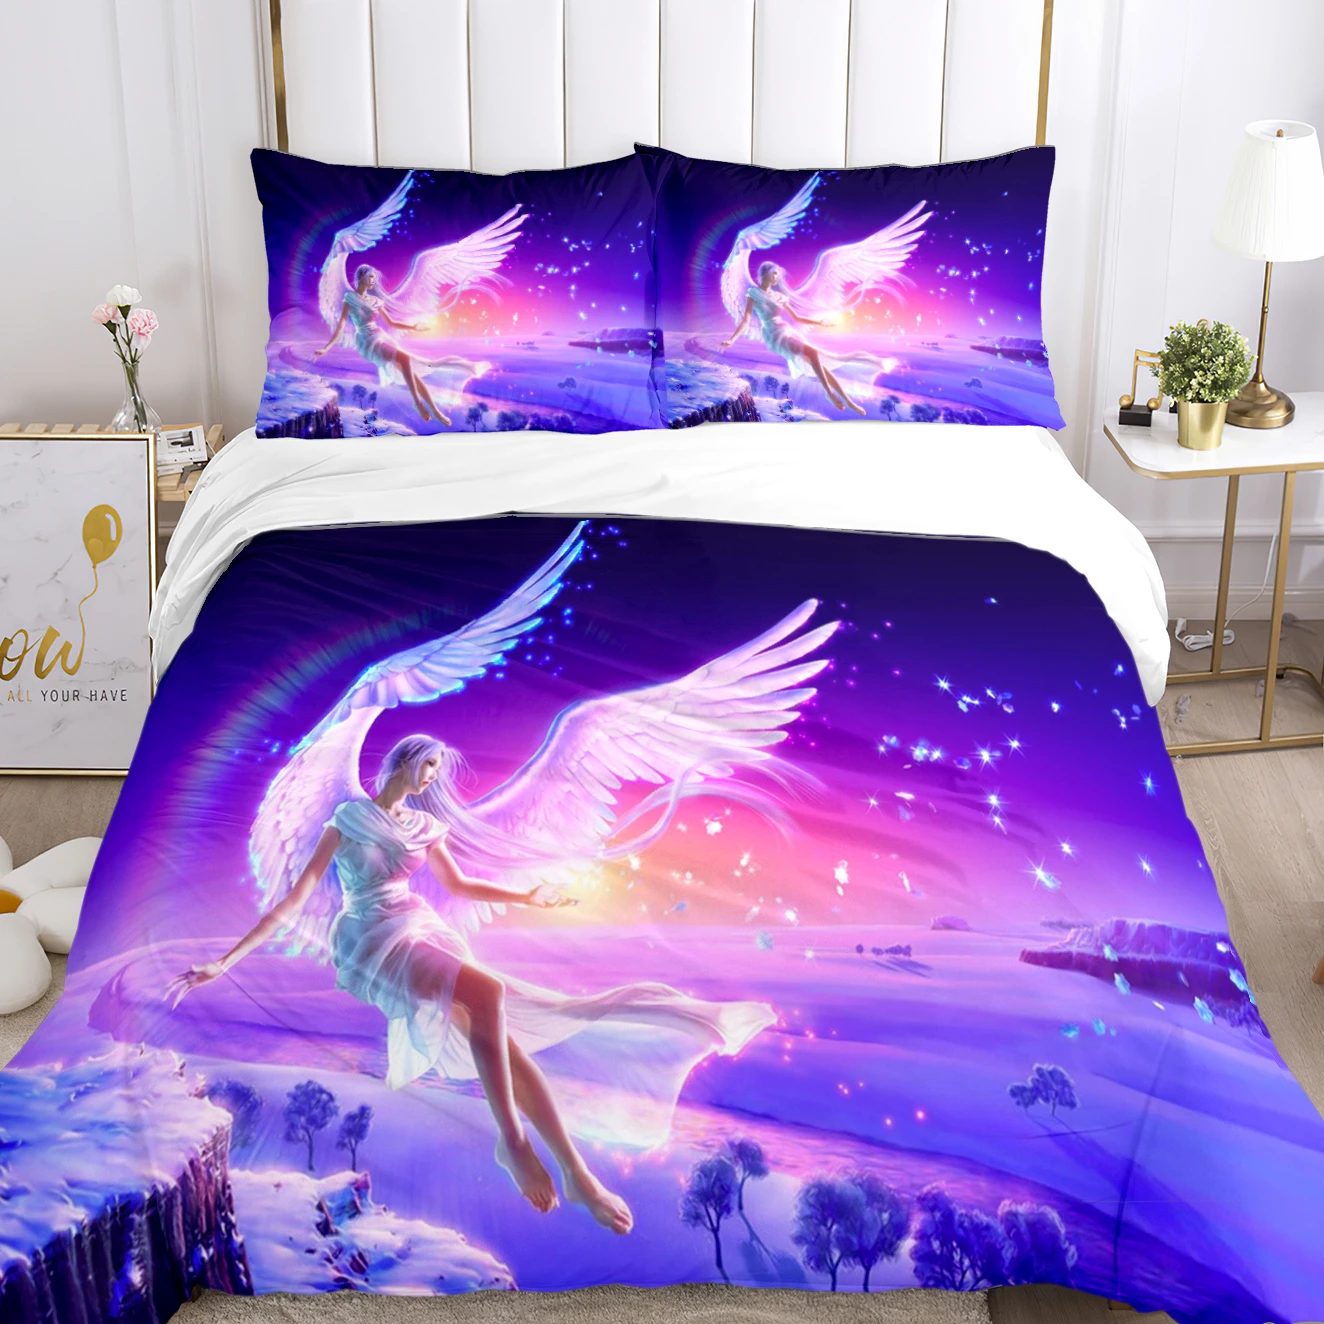 

Angel Warrior mythical Duvet Cover Comforter Bedding sets Soft Quilt Cover and Pillowcases for Teens Single/Double/Queen/King